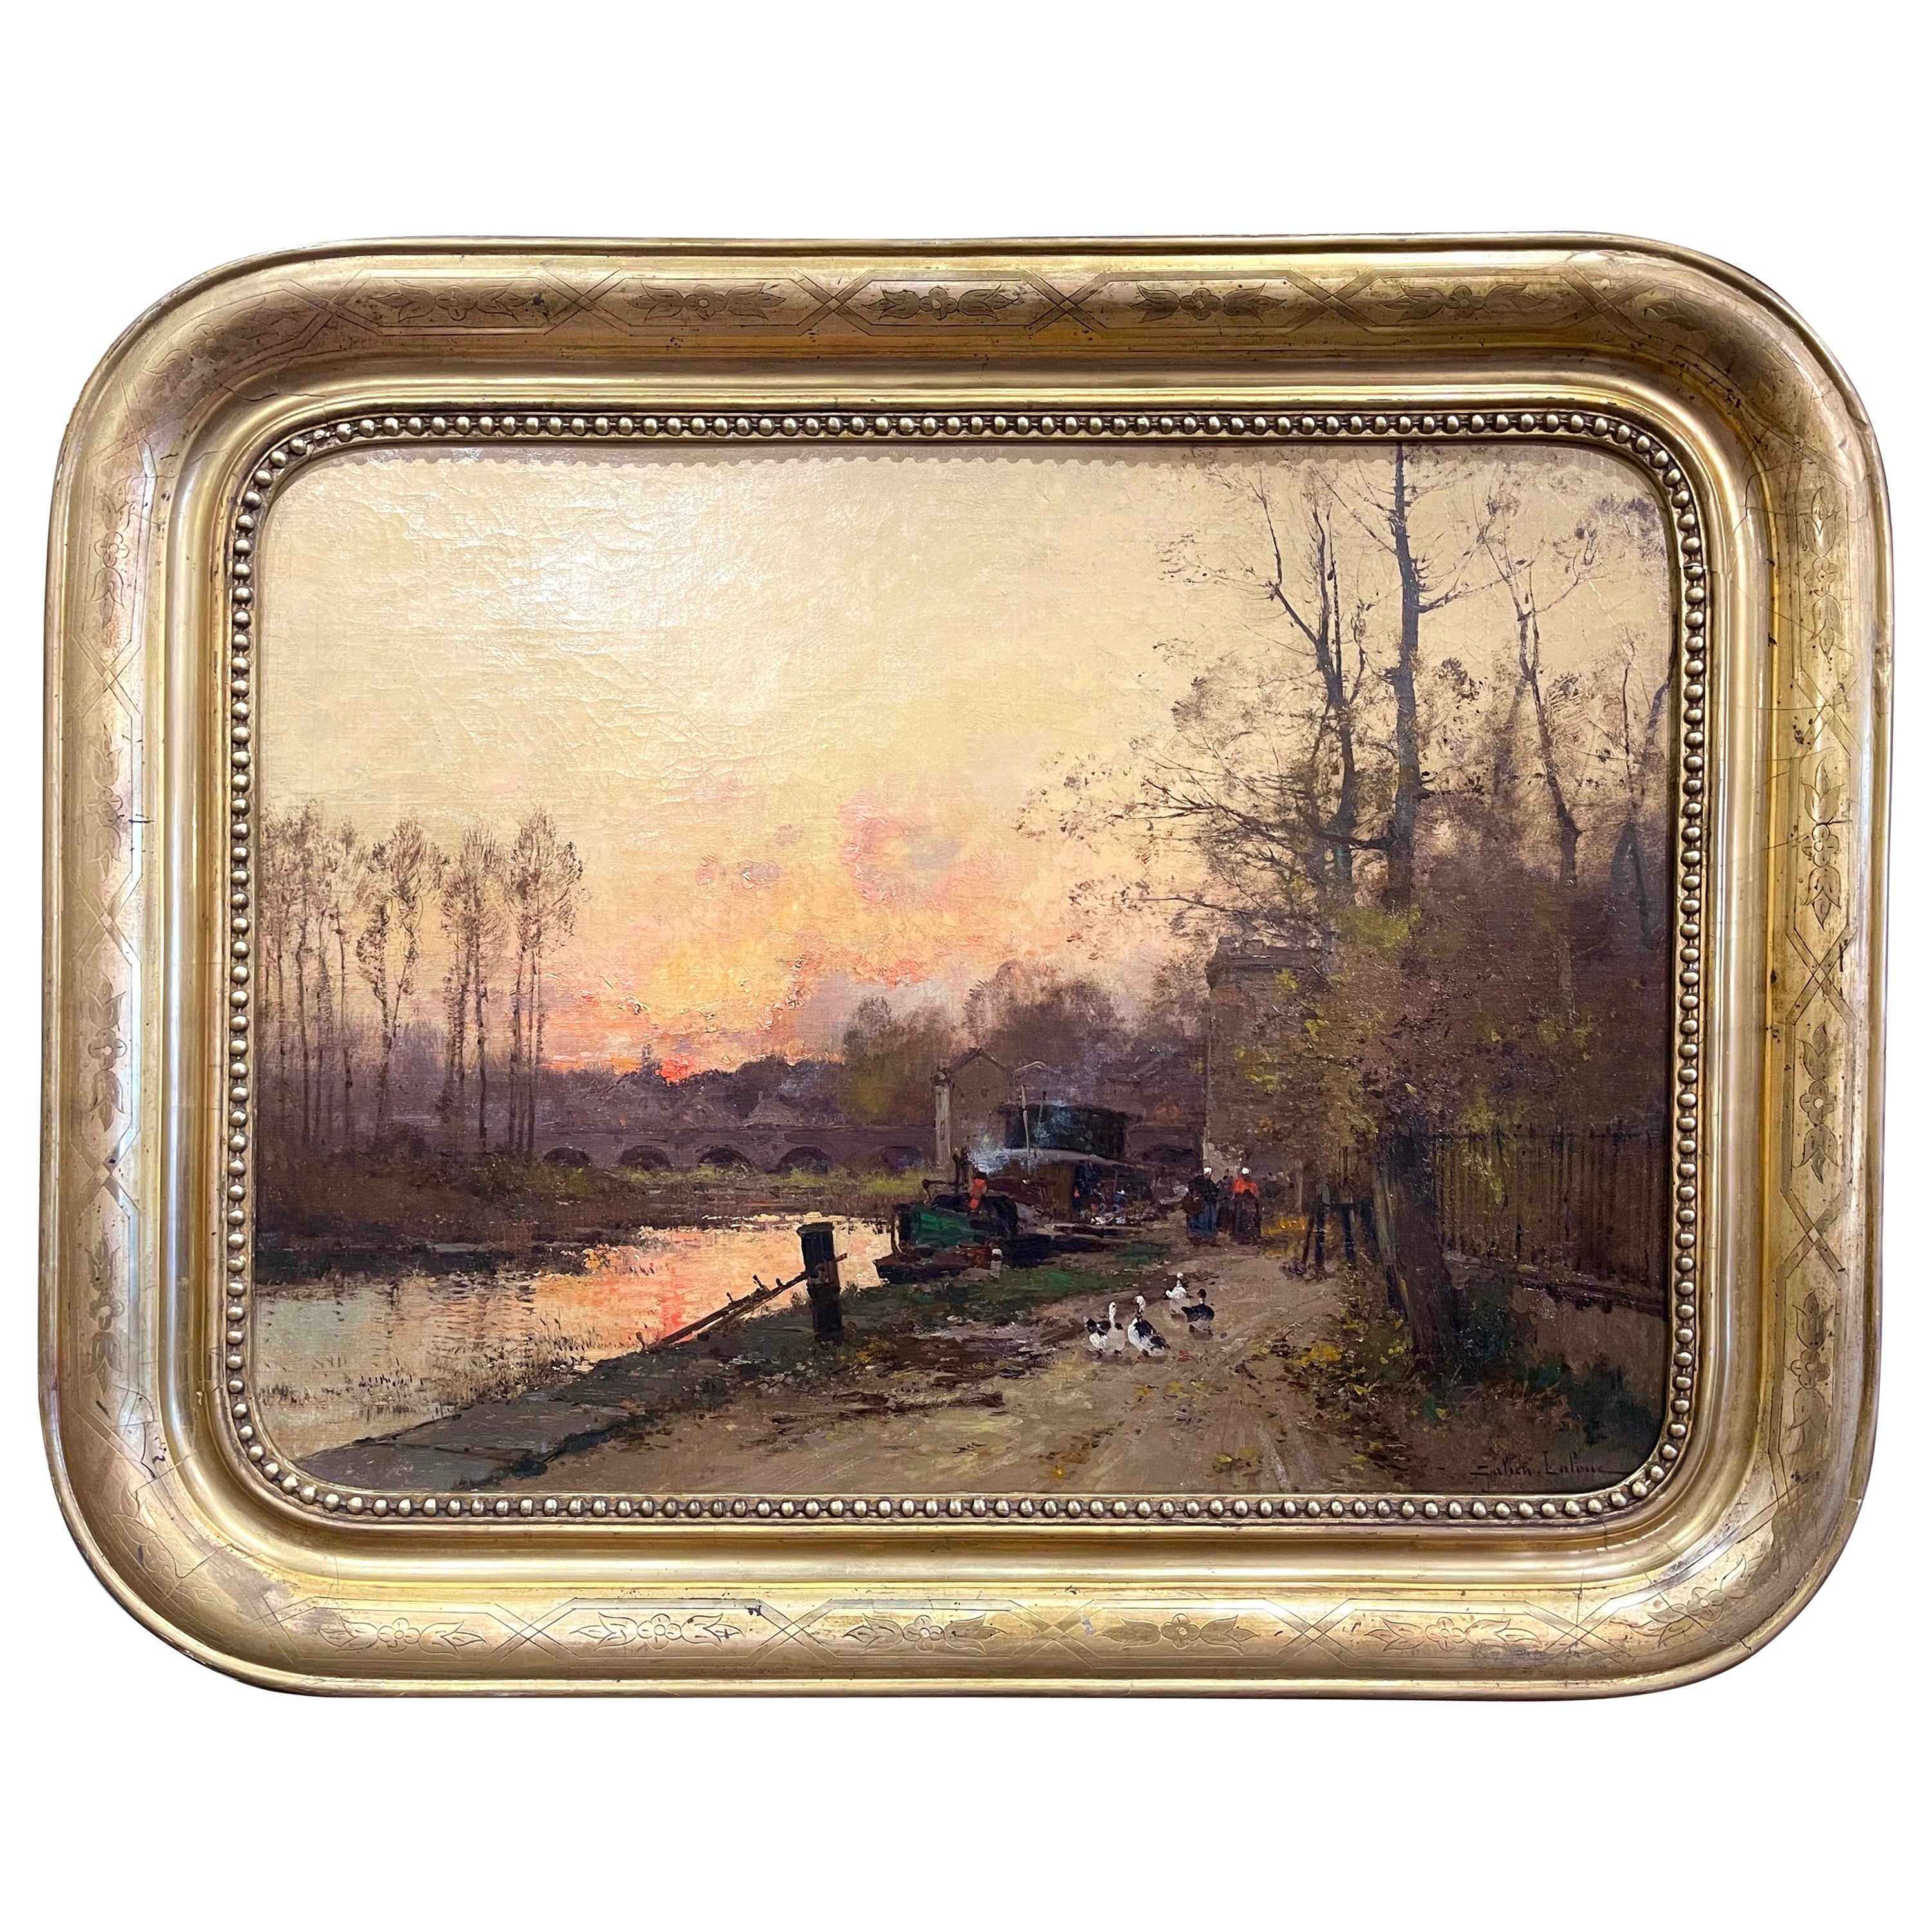 19th Century Framed Oil on Canvas Sunset Painting Signed E. Galien-Laloue